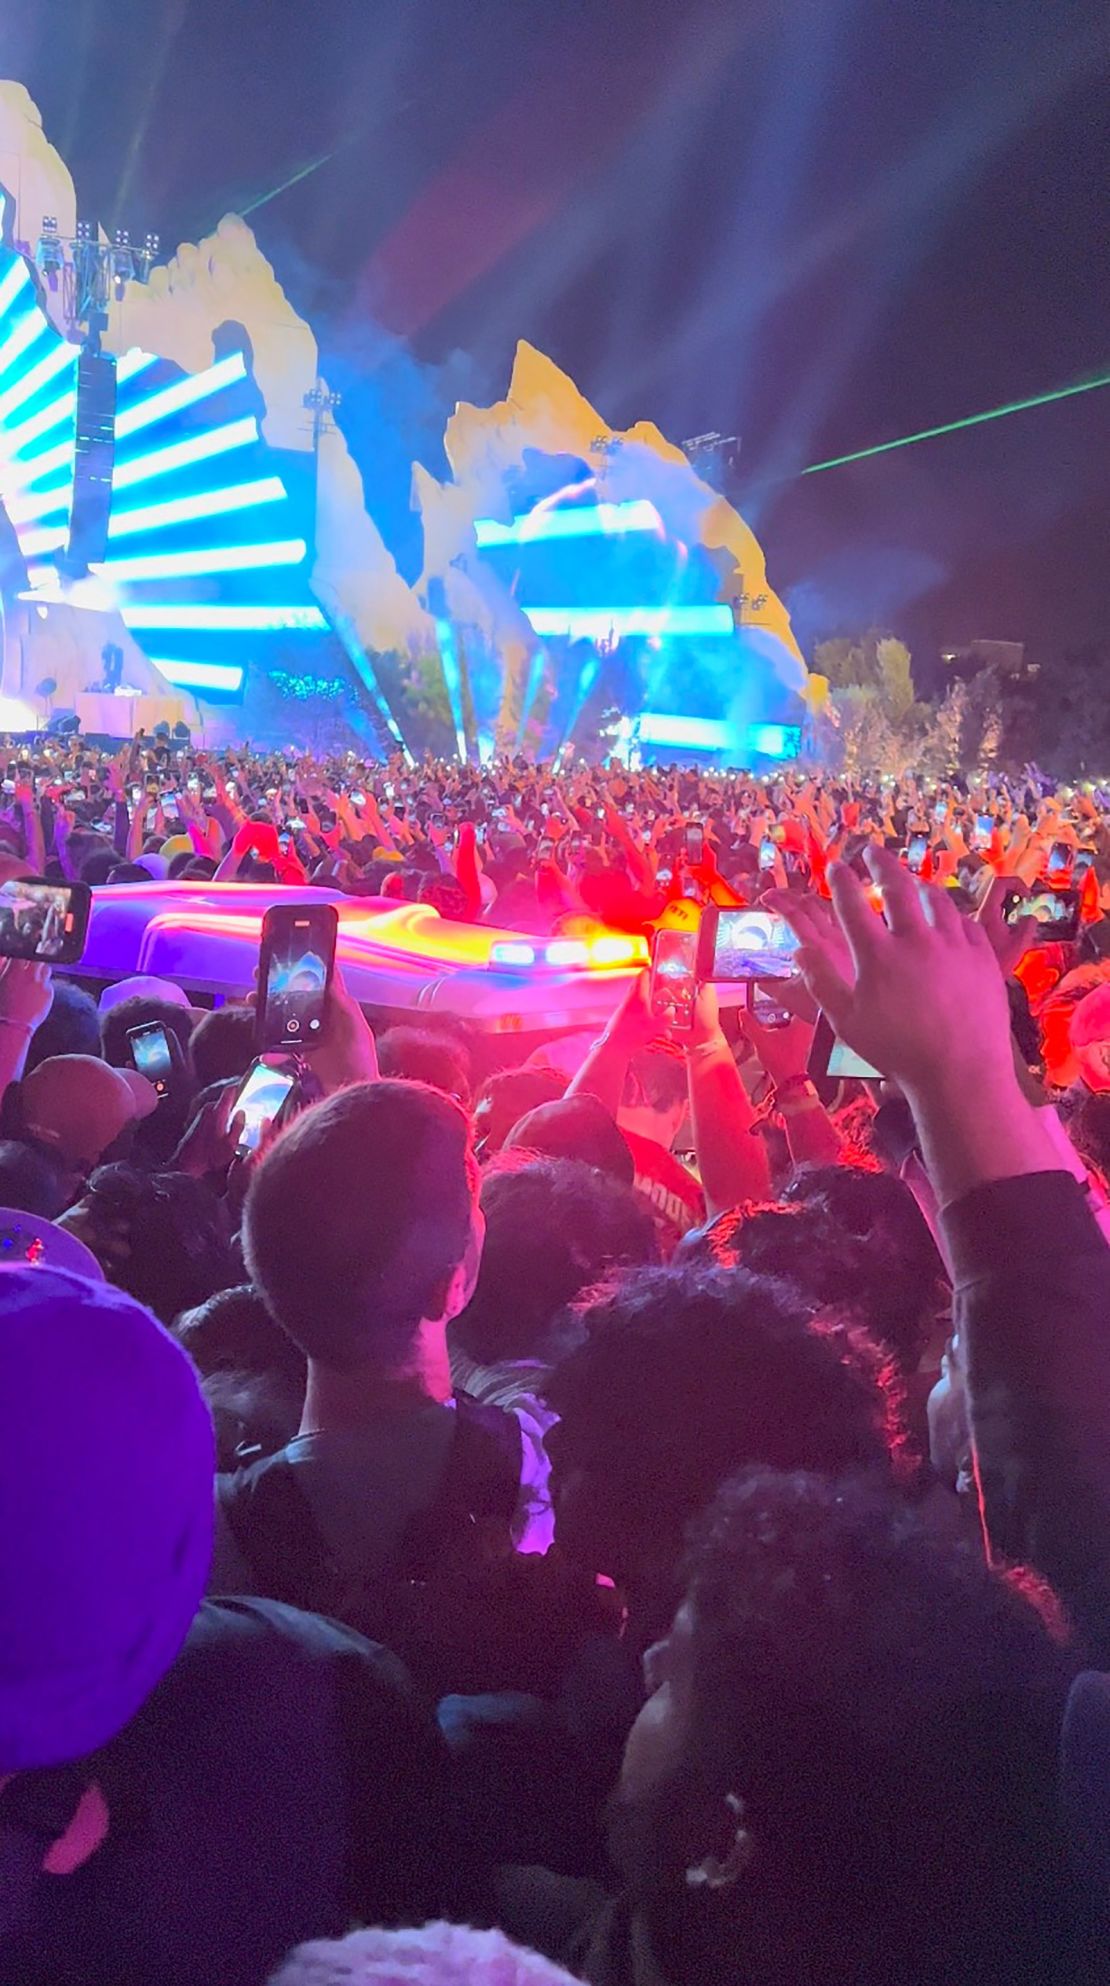 An ambulance is seen in the crowd during the Astroworld music festival.